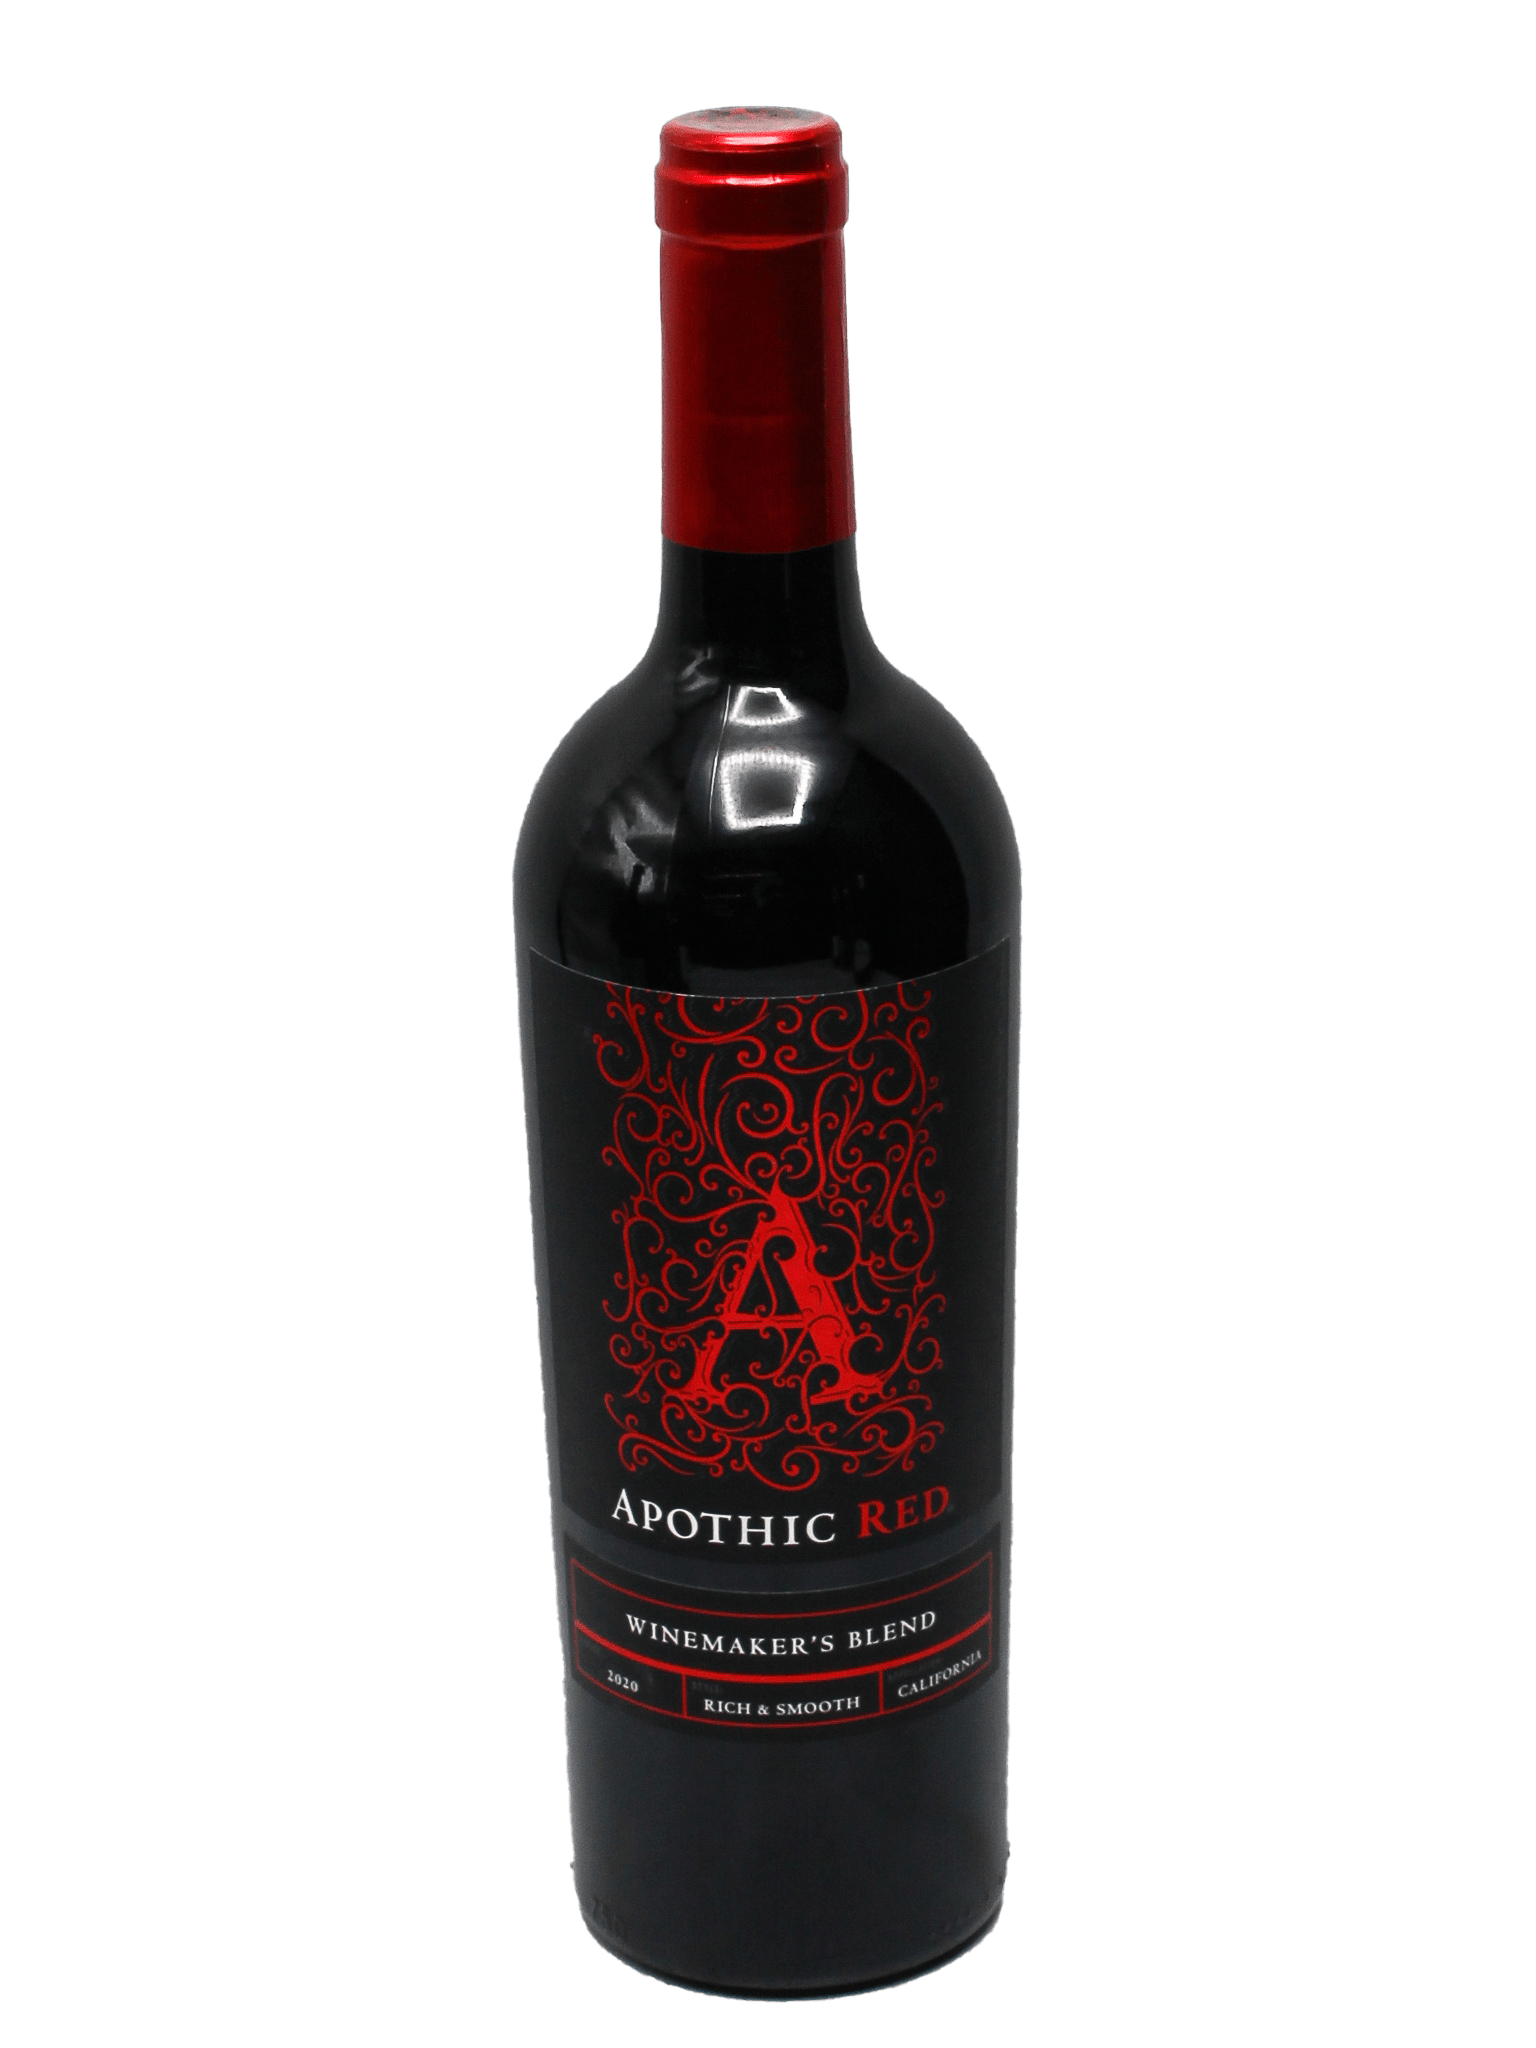 2021 Apothic Red Winemakers Blend Bottle Barn 6470